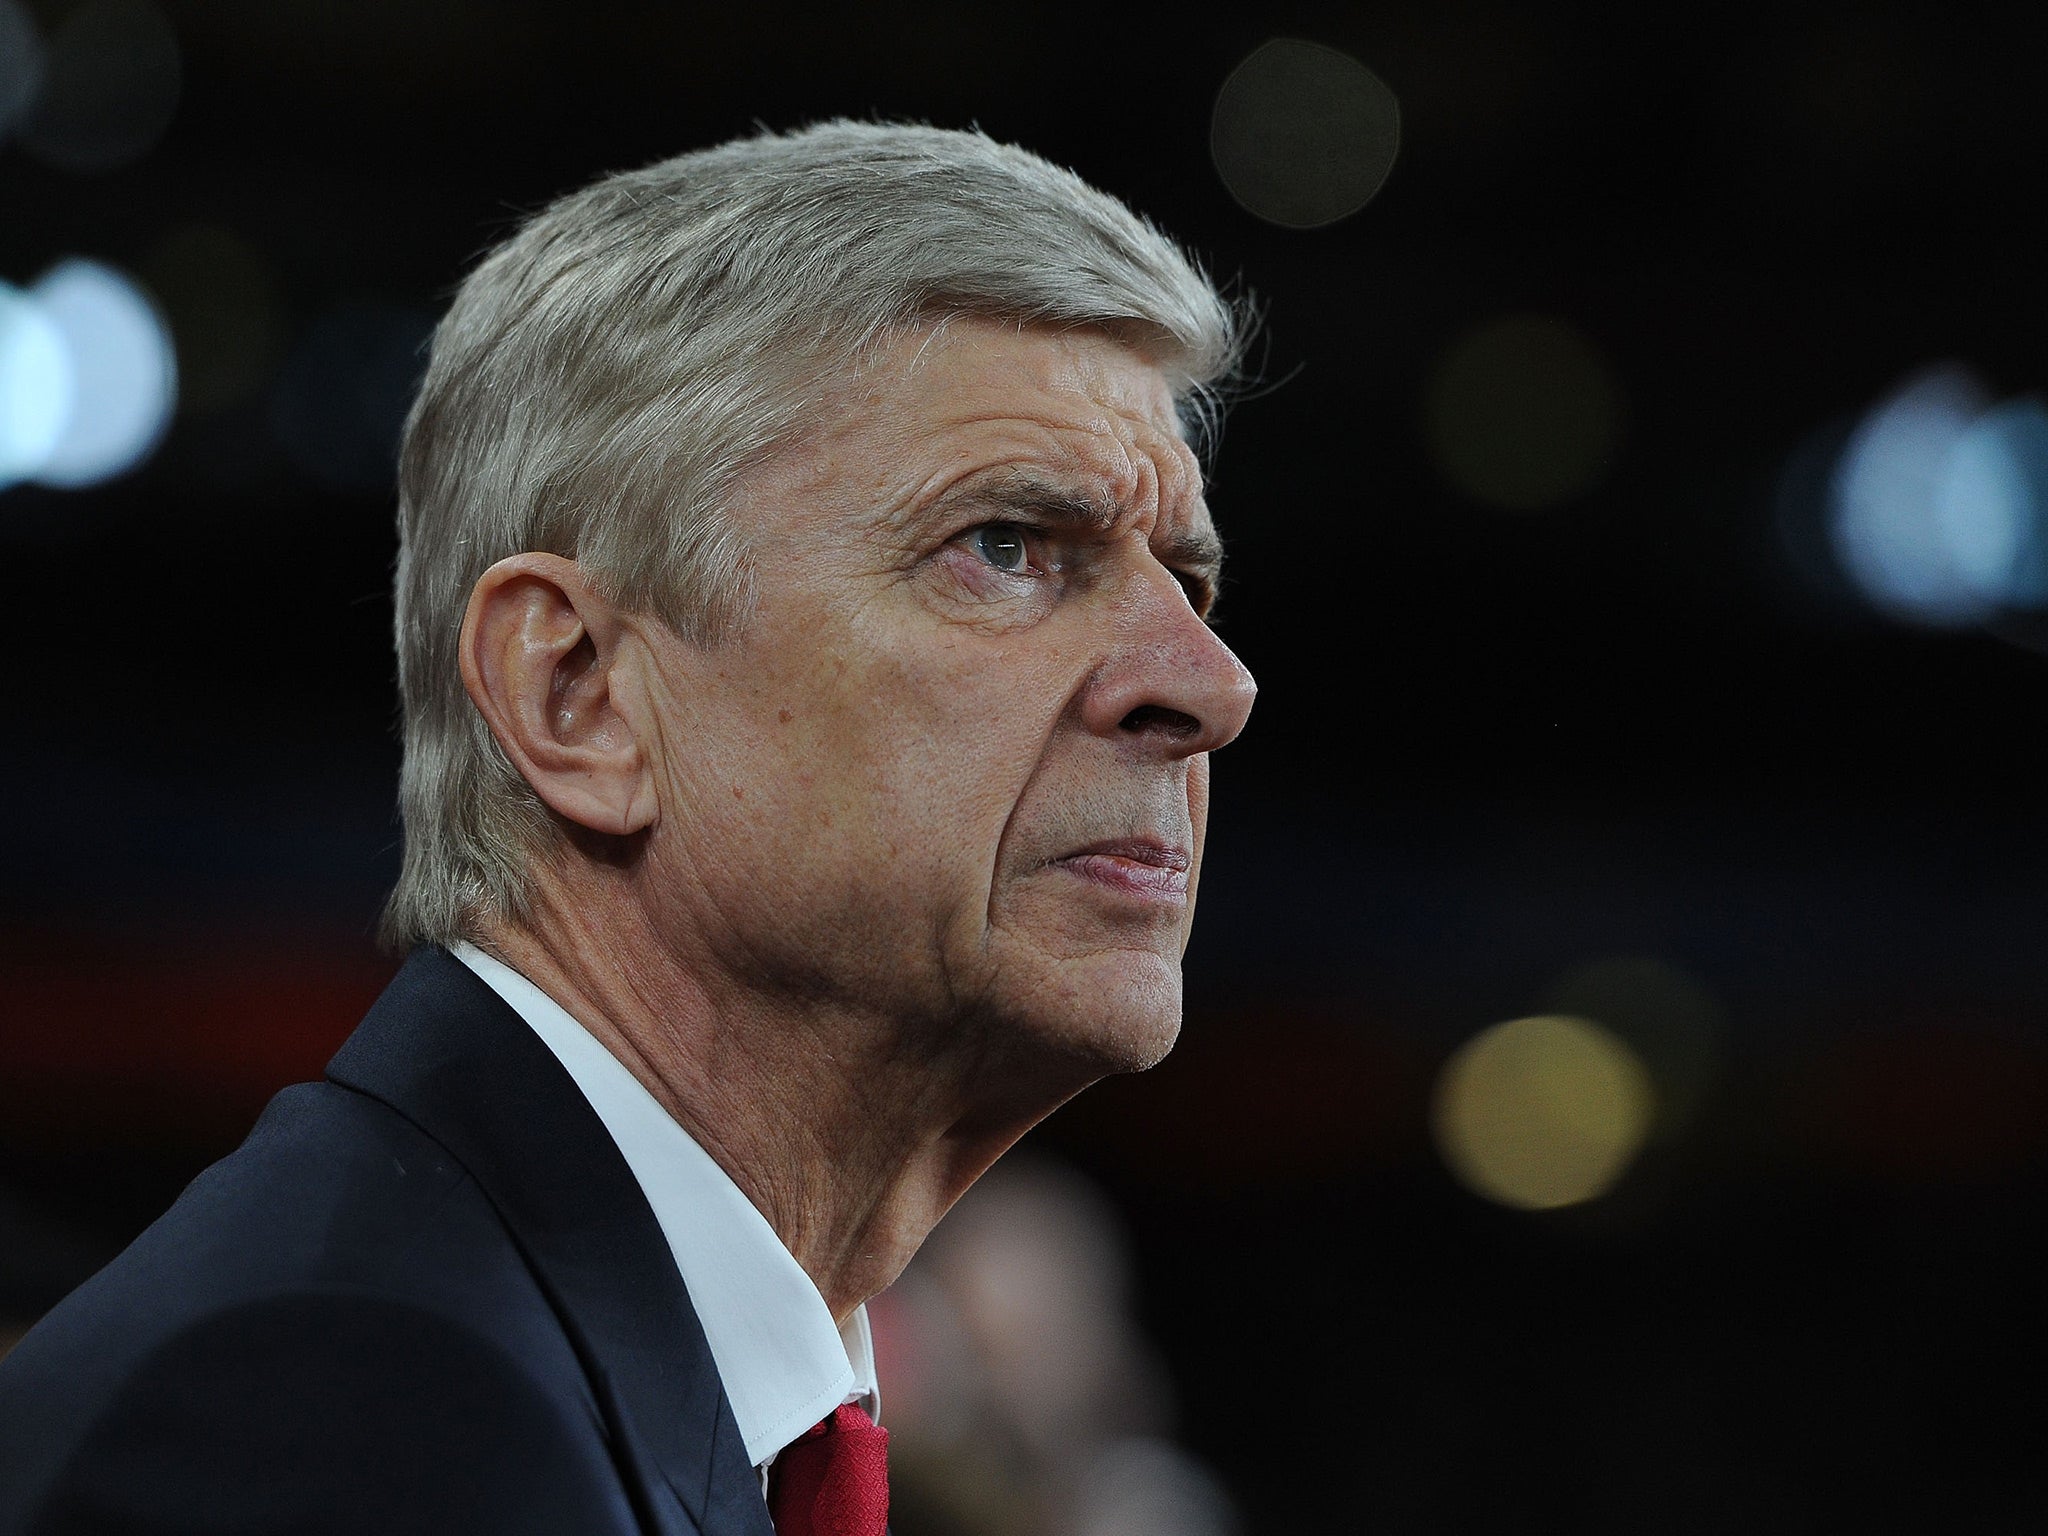 Wenger thought his side allowed PSG to 'play too comfortably'